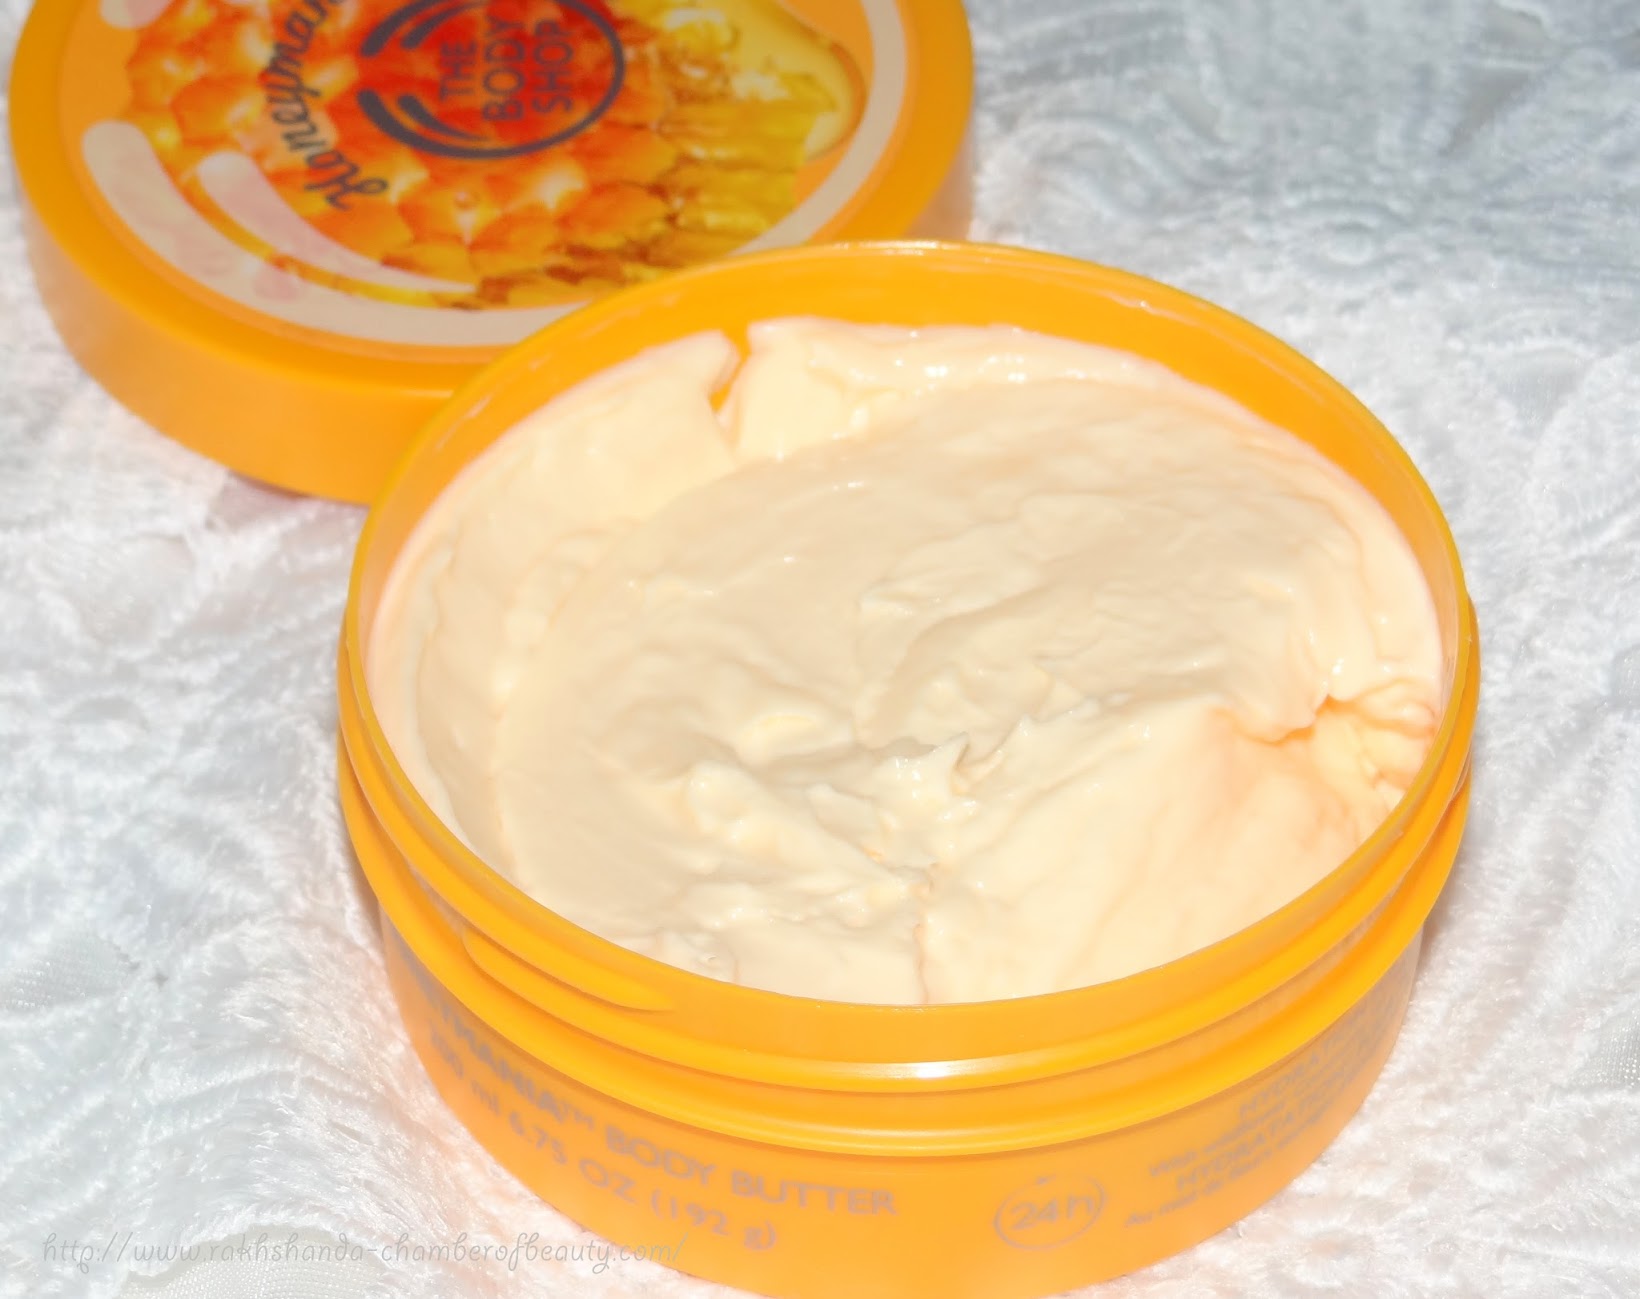 The Body Shop Honeymania Body Butter- Review & price in India, The Body Shop body butter, Honeymania body butter, dry skin moisturiser, review, Indian Beauty blogger, Chamber of Beauty